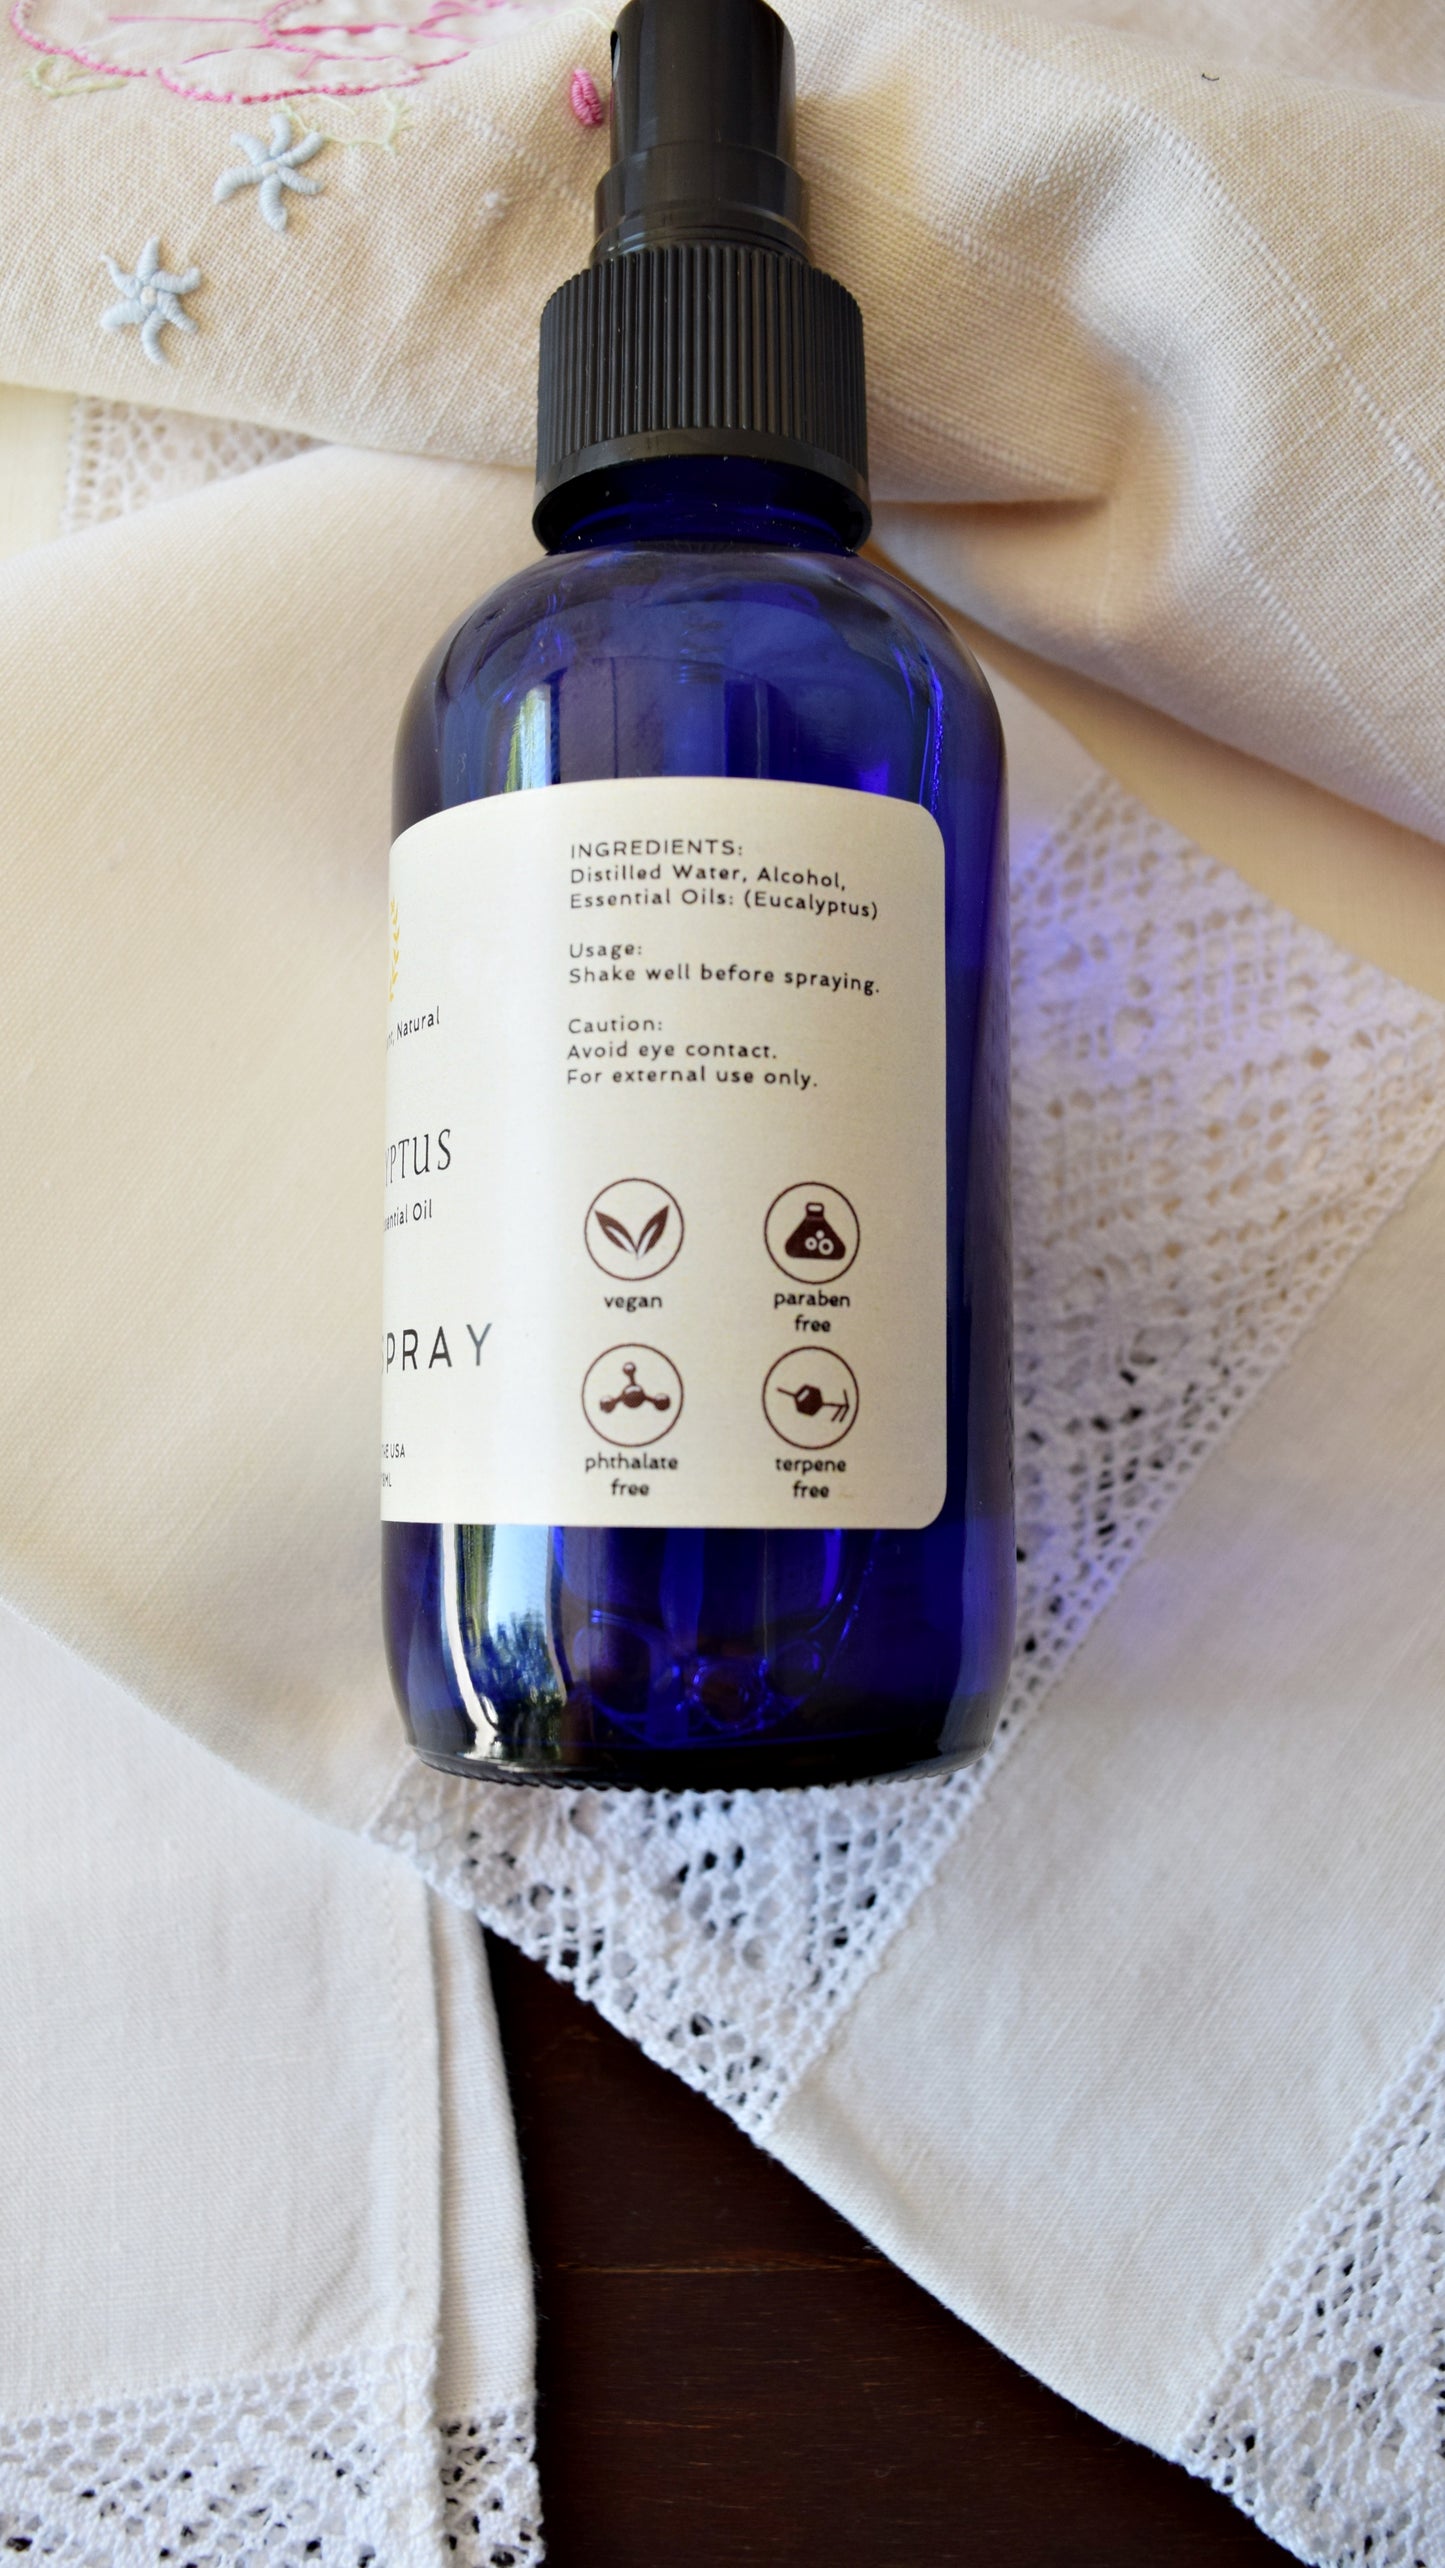 Linen Spray -  Sweet Romance - Blend of Lavender, Bergamot, Patchouli & Ylang Ylang. Keep Your Clothes Smelling Like a Dream